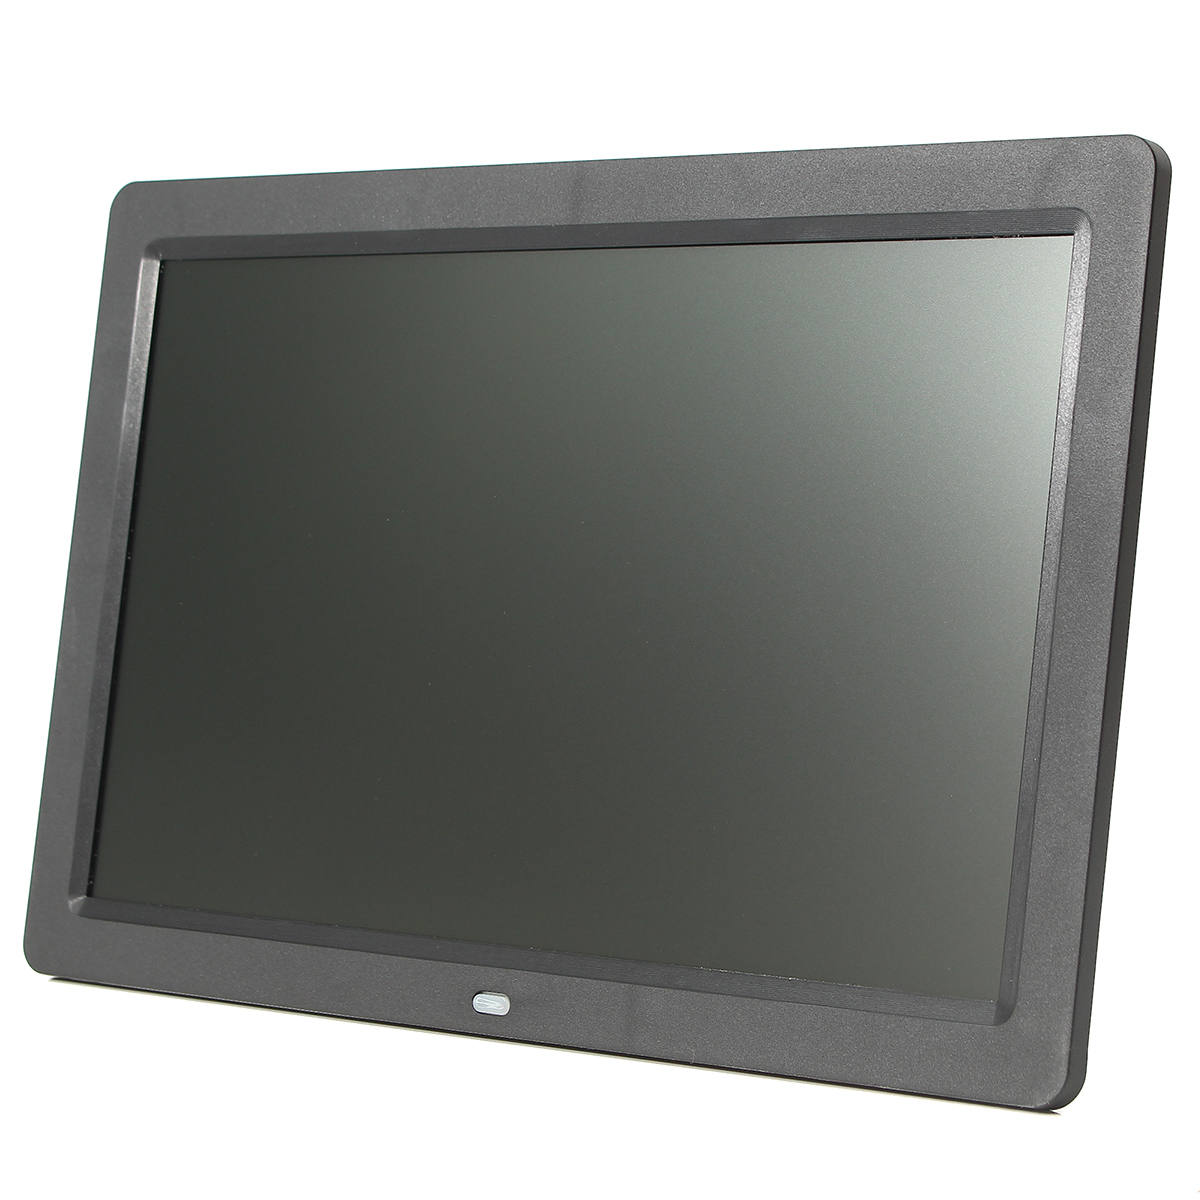 12-Inch-HD-Digital-Photo-Frame-Gallery-Advertising-Machine-with-Remote-Control-1289173